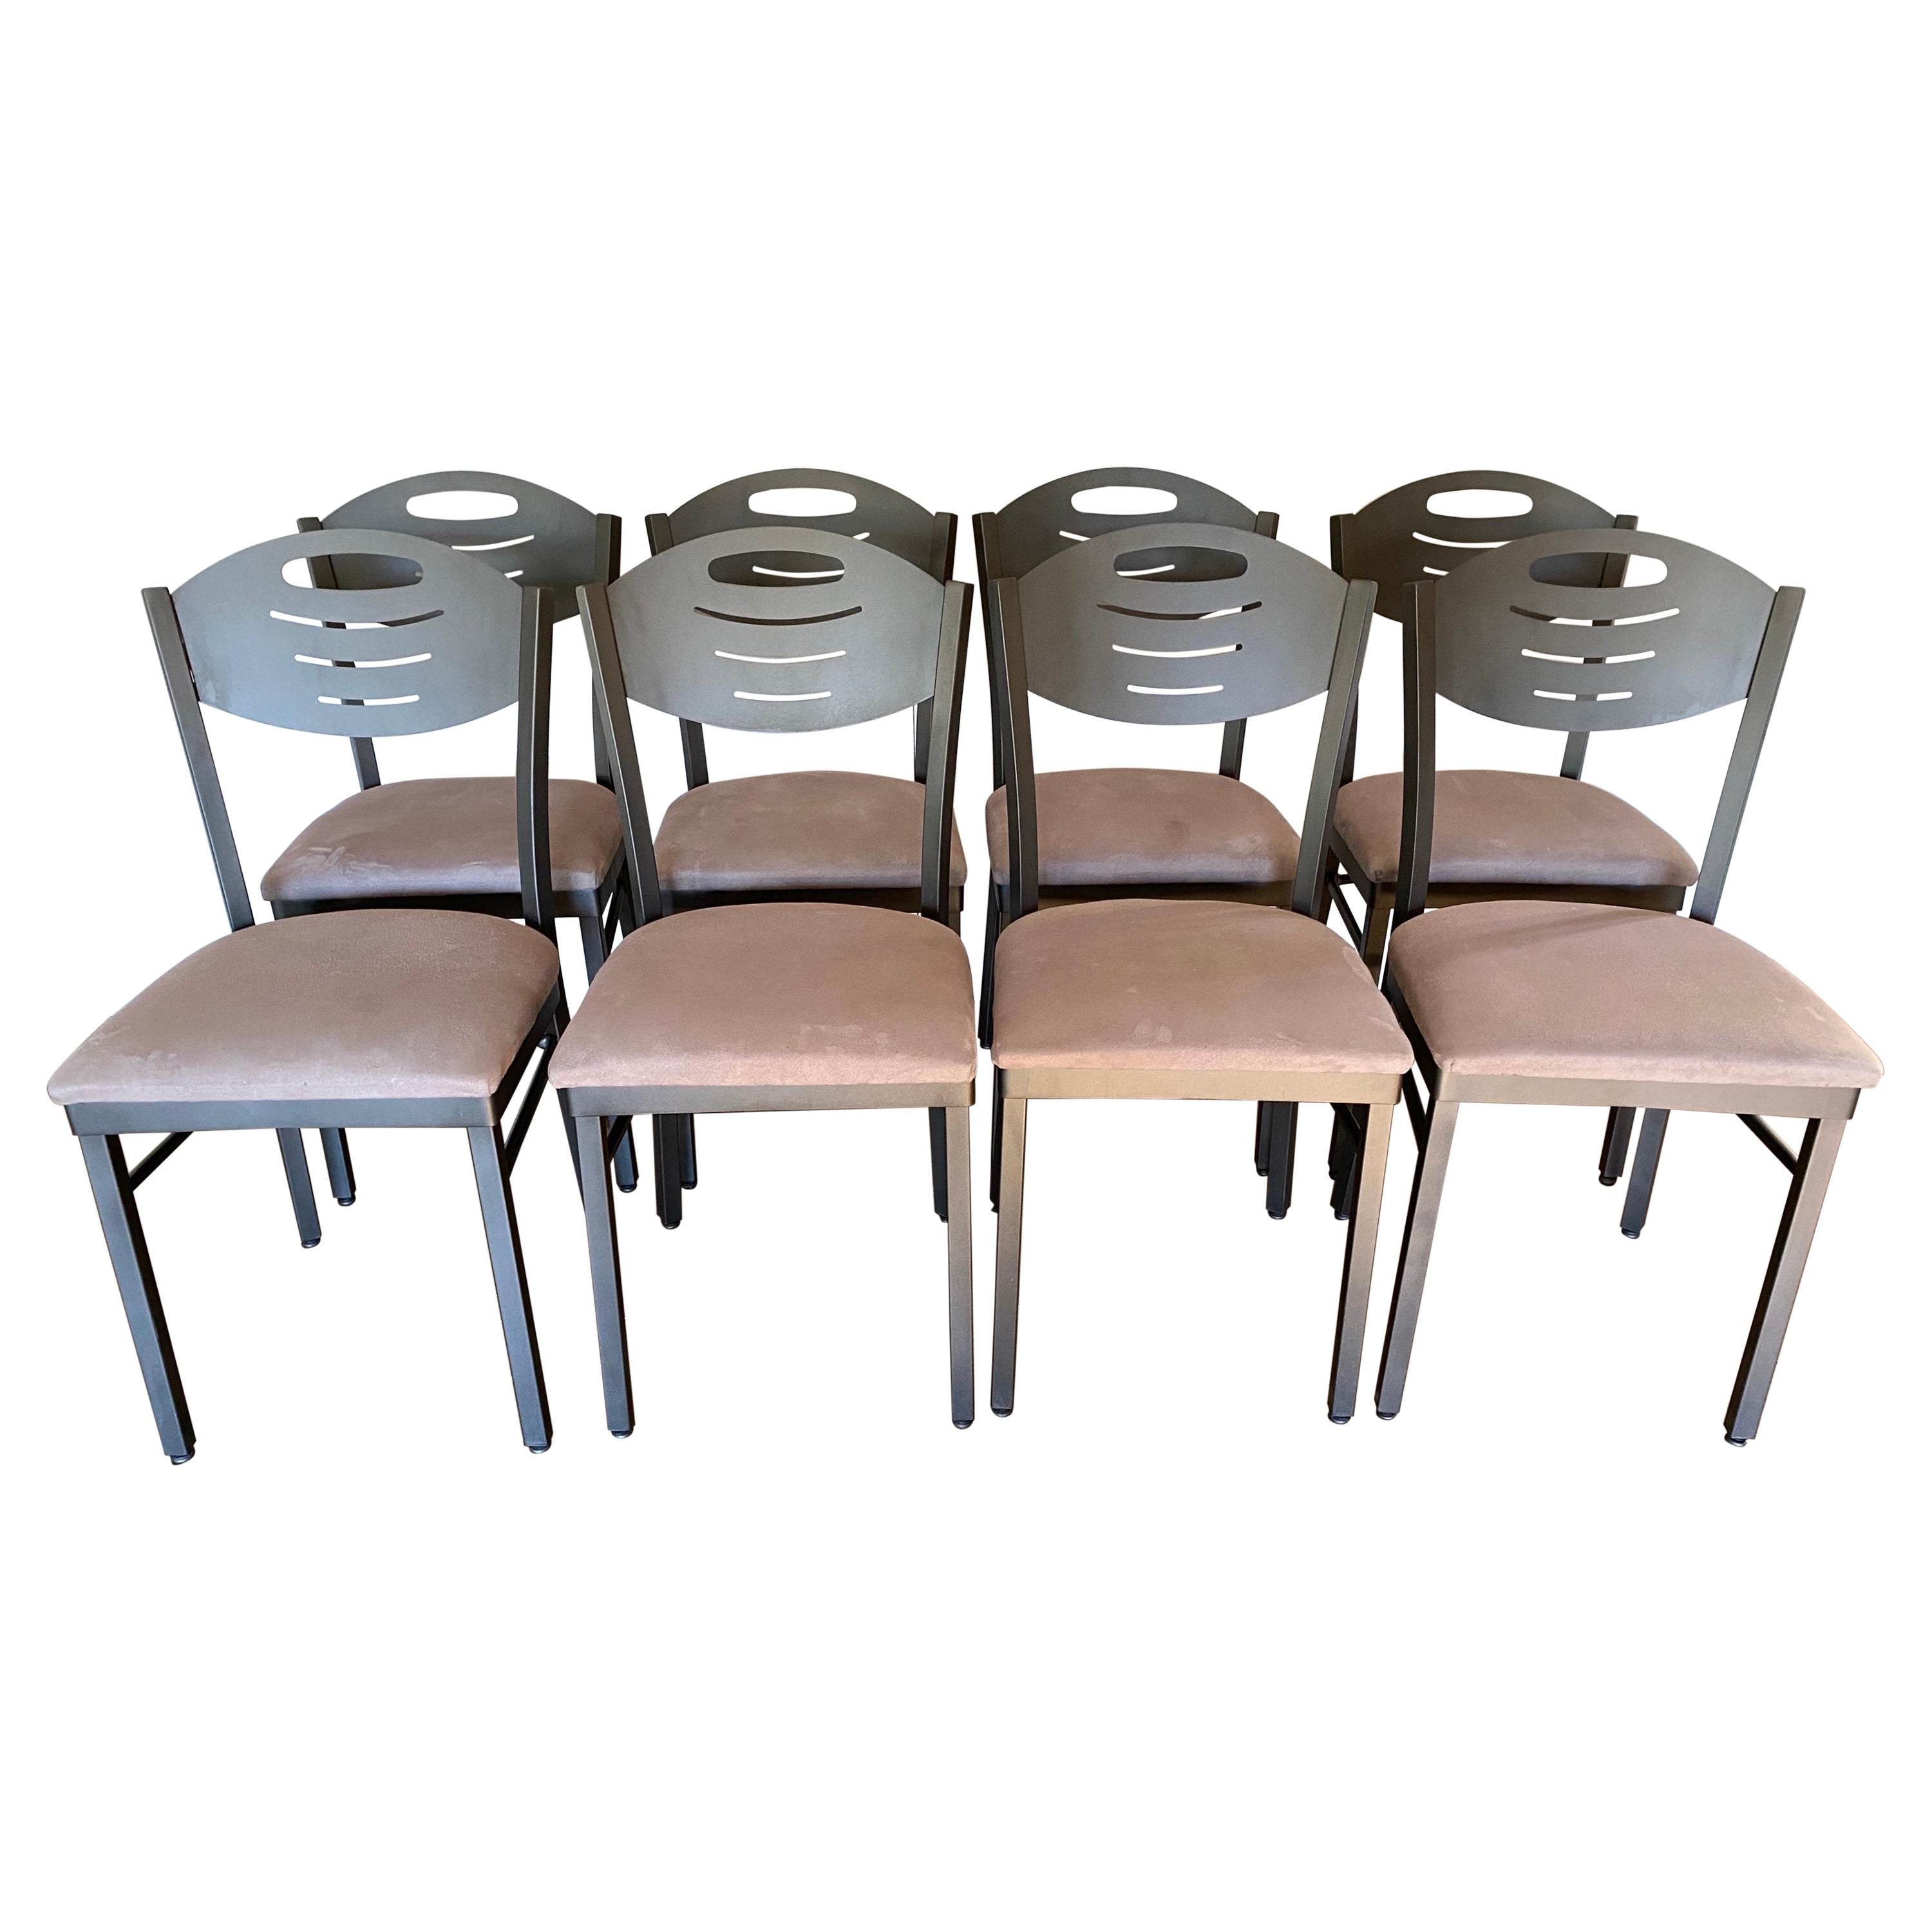 Set of 8 Mid-Century Modern Metal Dining Chairs